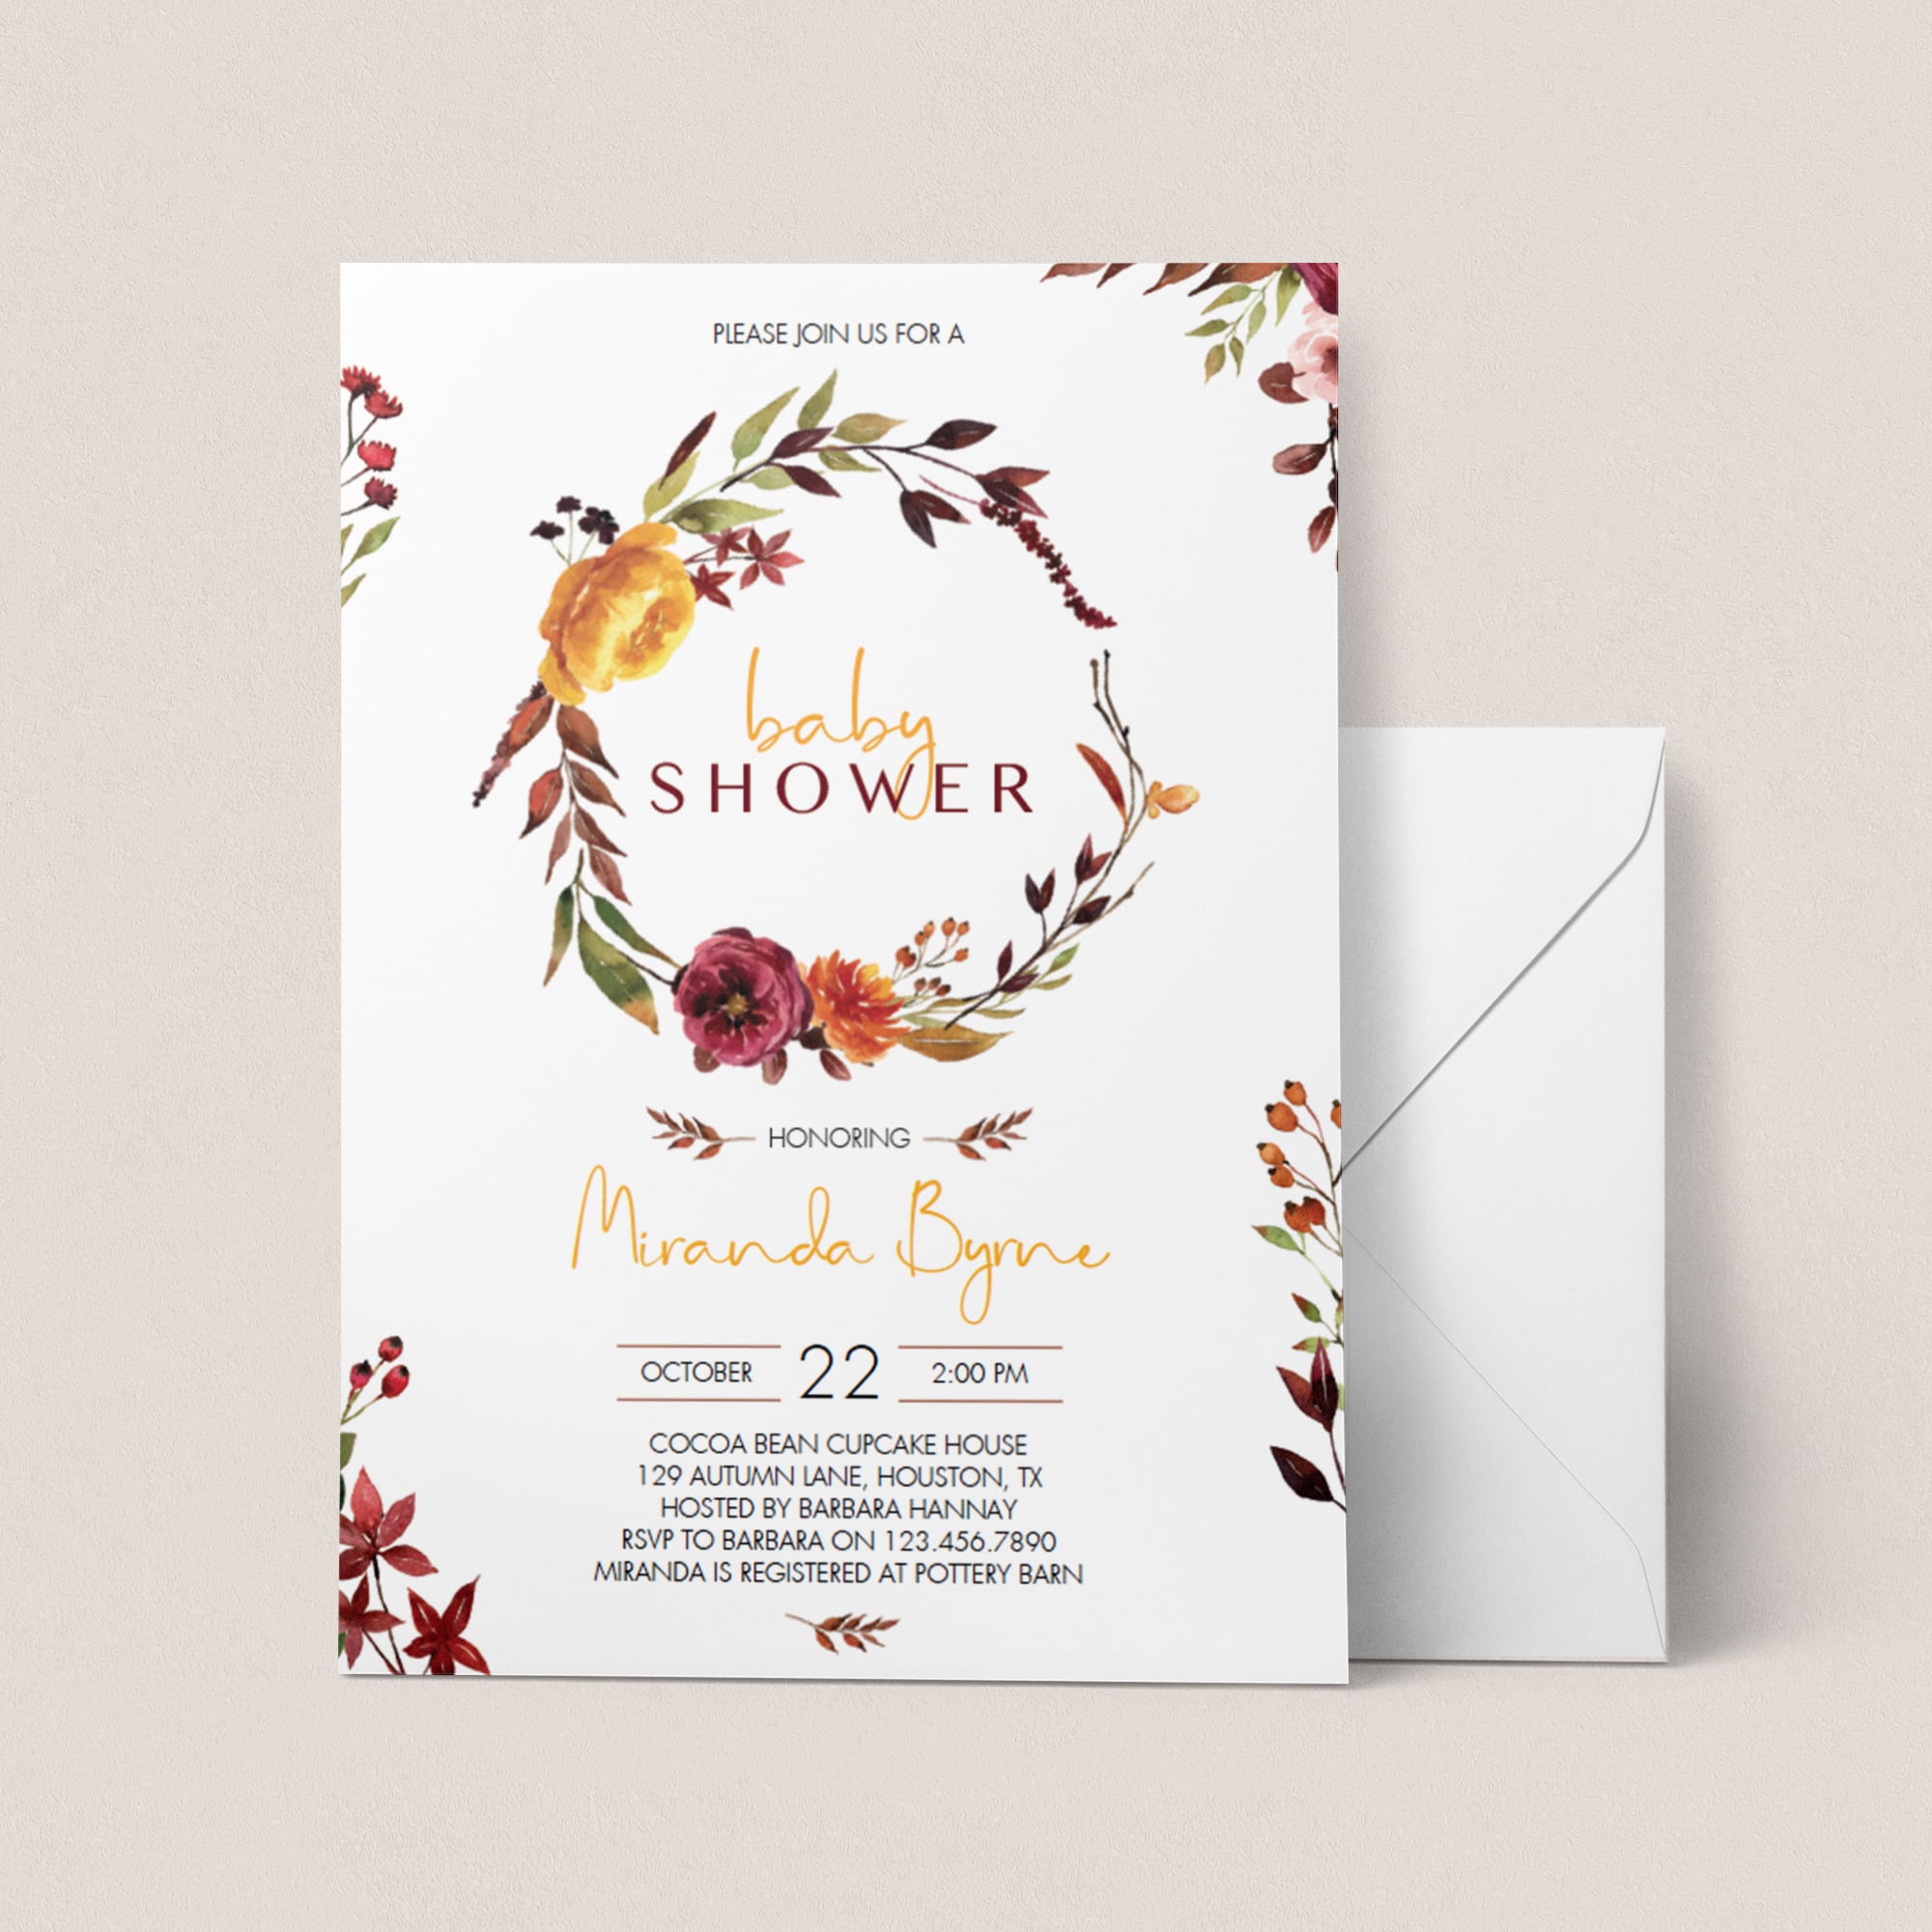 Floral wreath babyshower invitation template by LittleSizzle